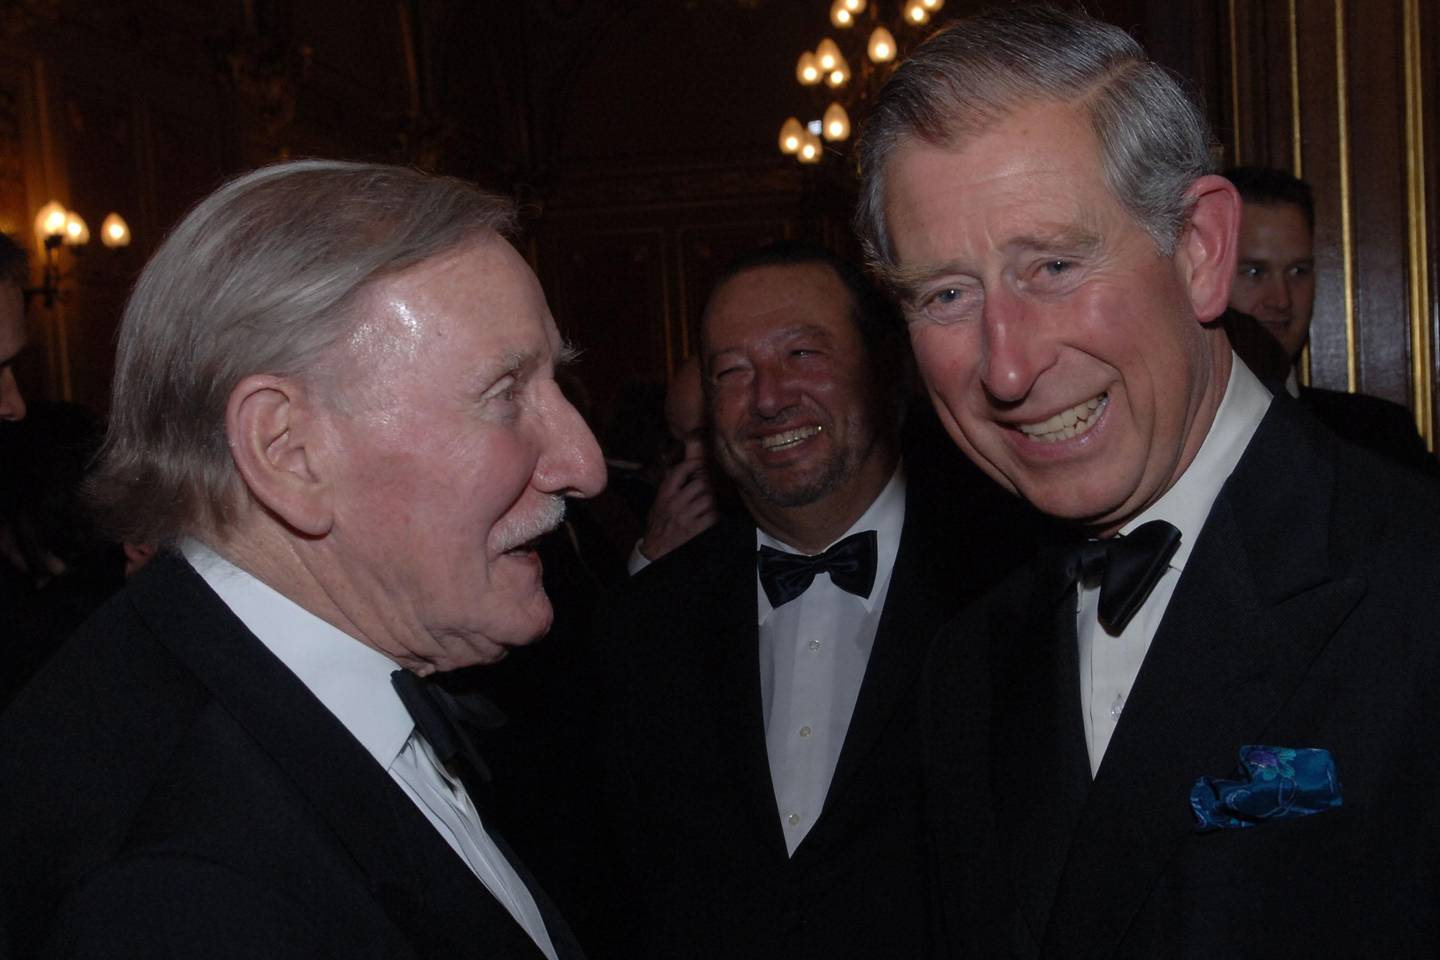 Leslie Philips with then Prince Charles at the Royal Shakespeare Company's gala fundraising dinner in 2006. AP